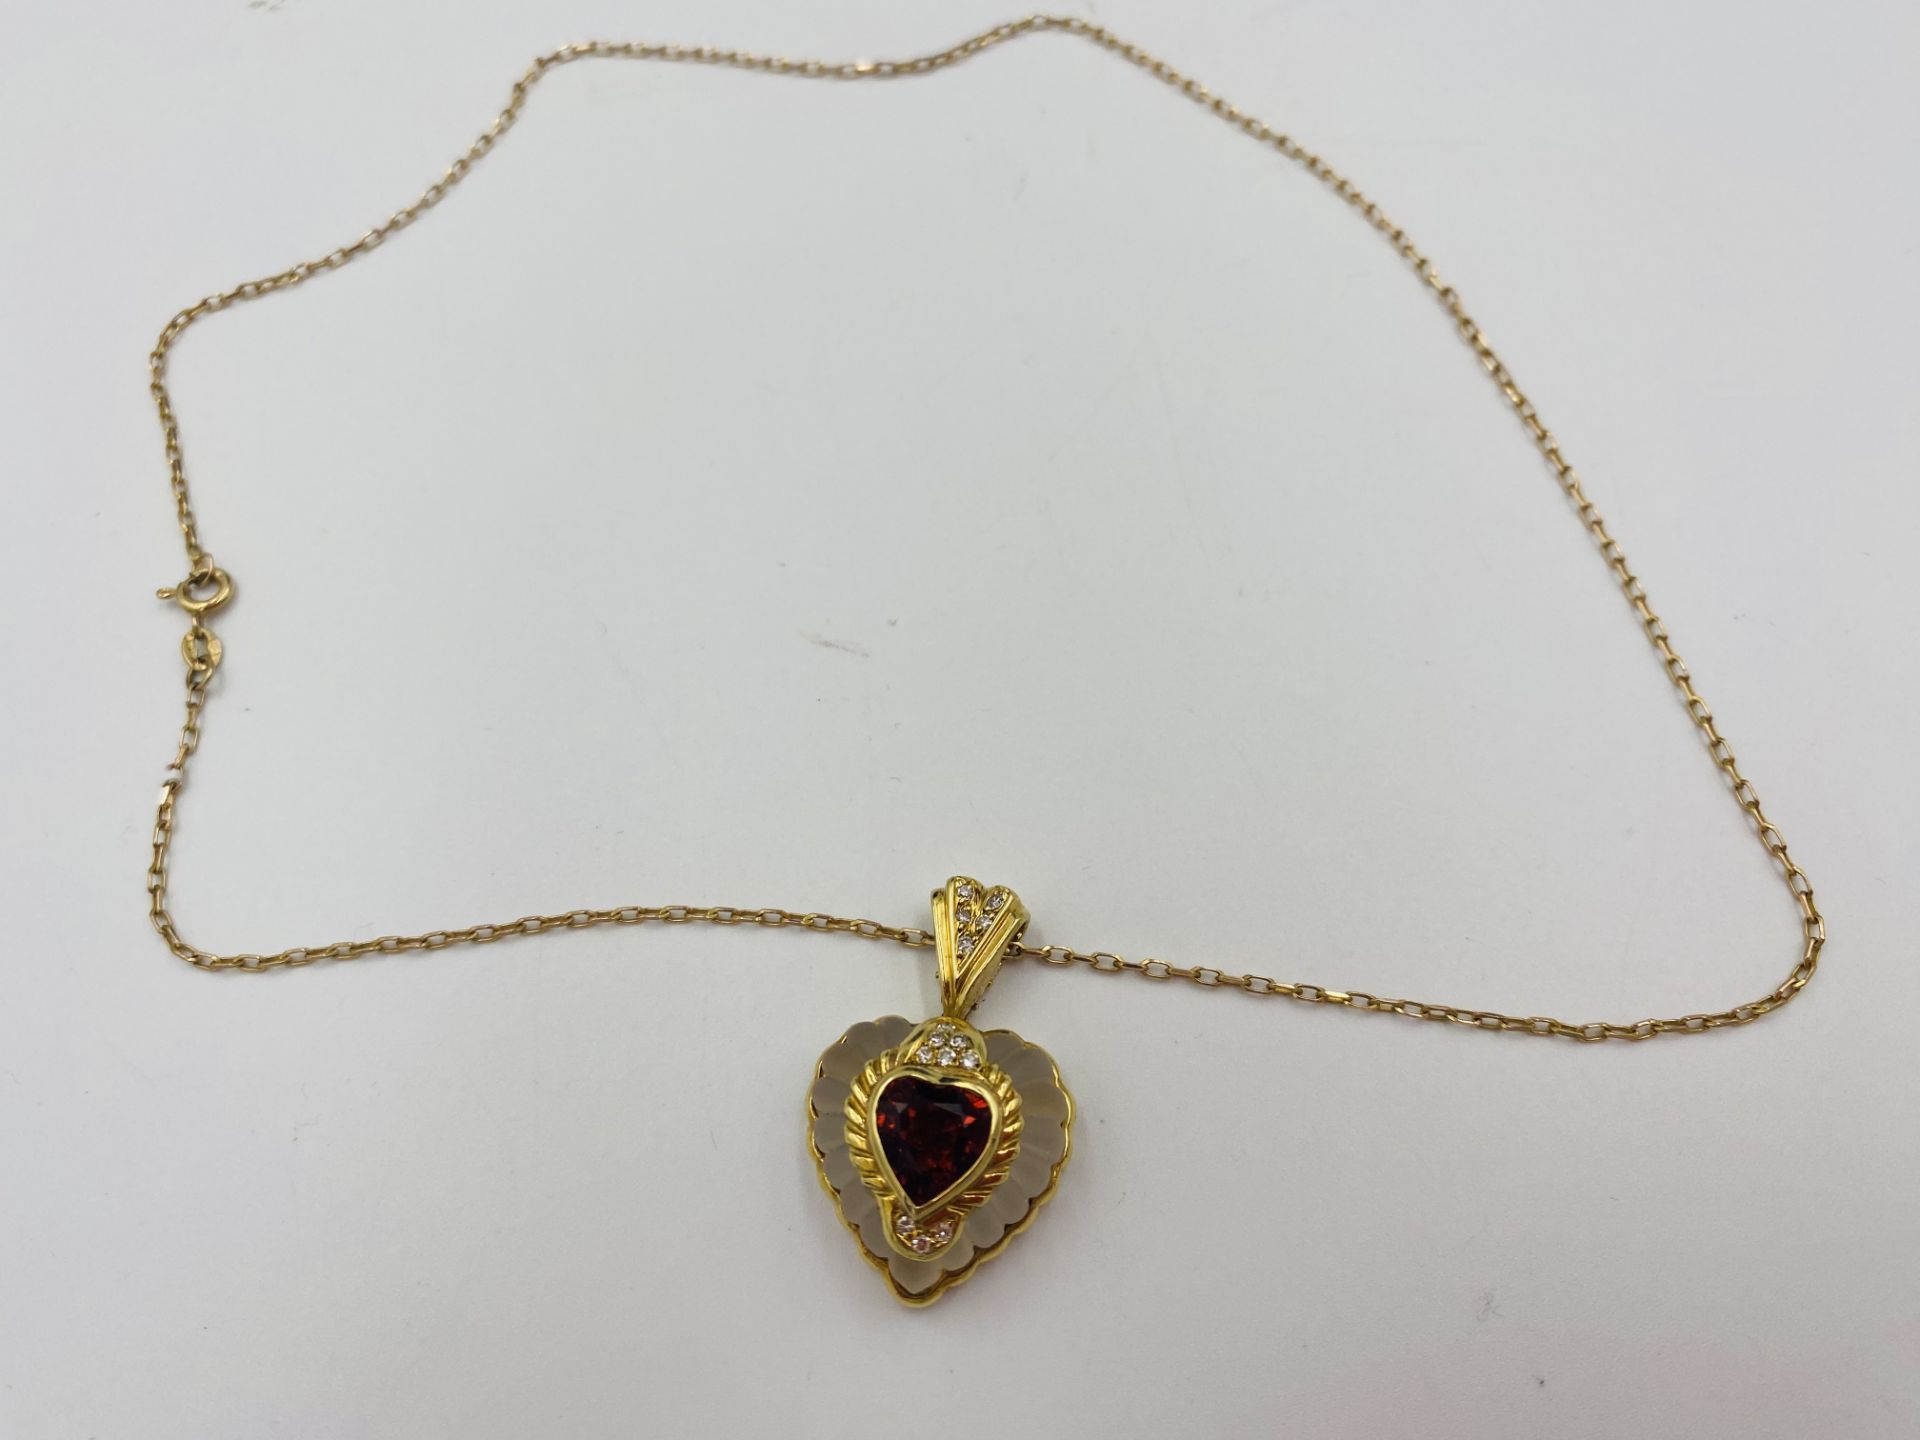 Rock crystal heart shaped pendant with 18ct gold mount - Image 6 of 6